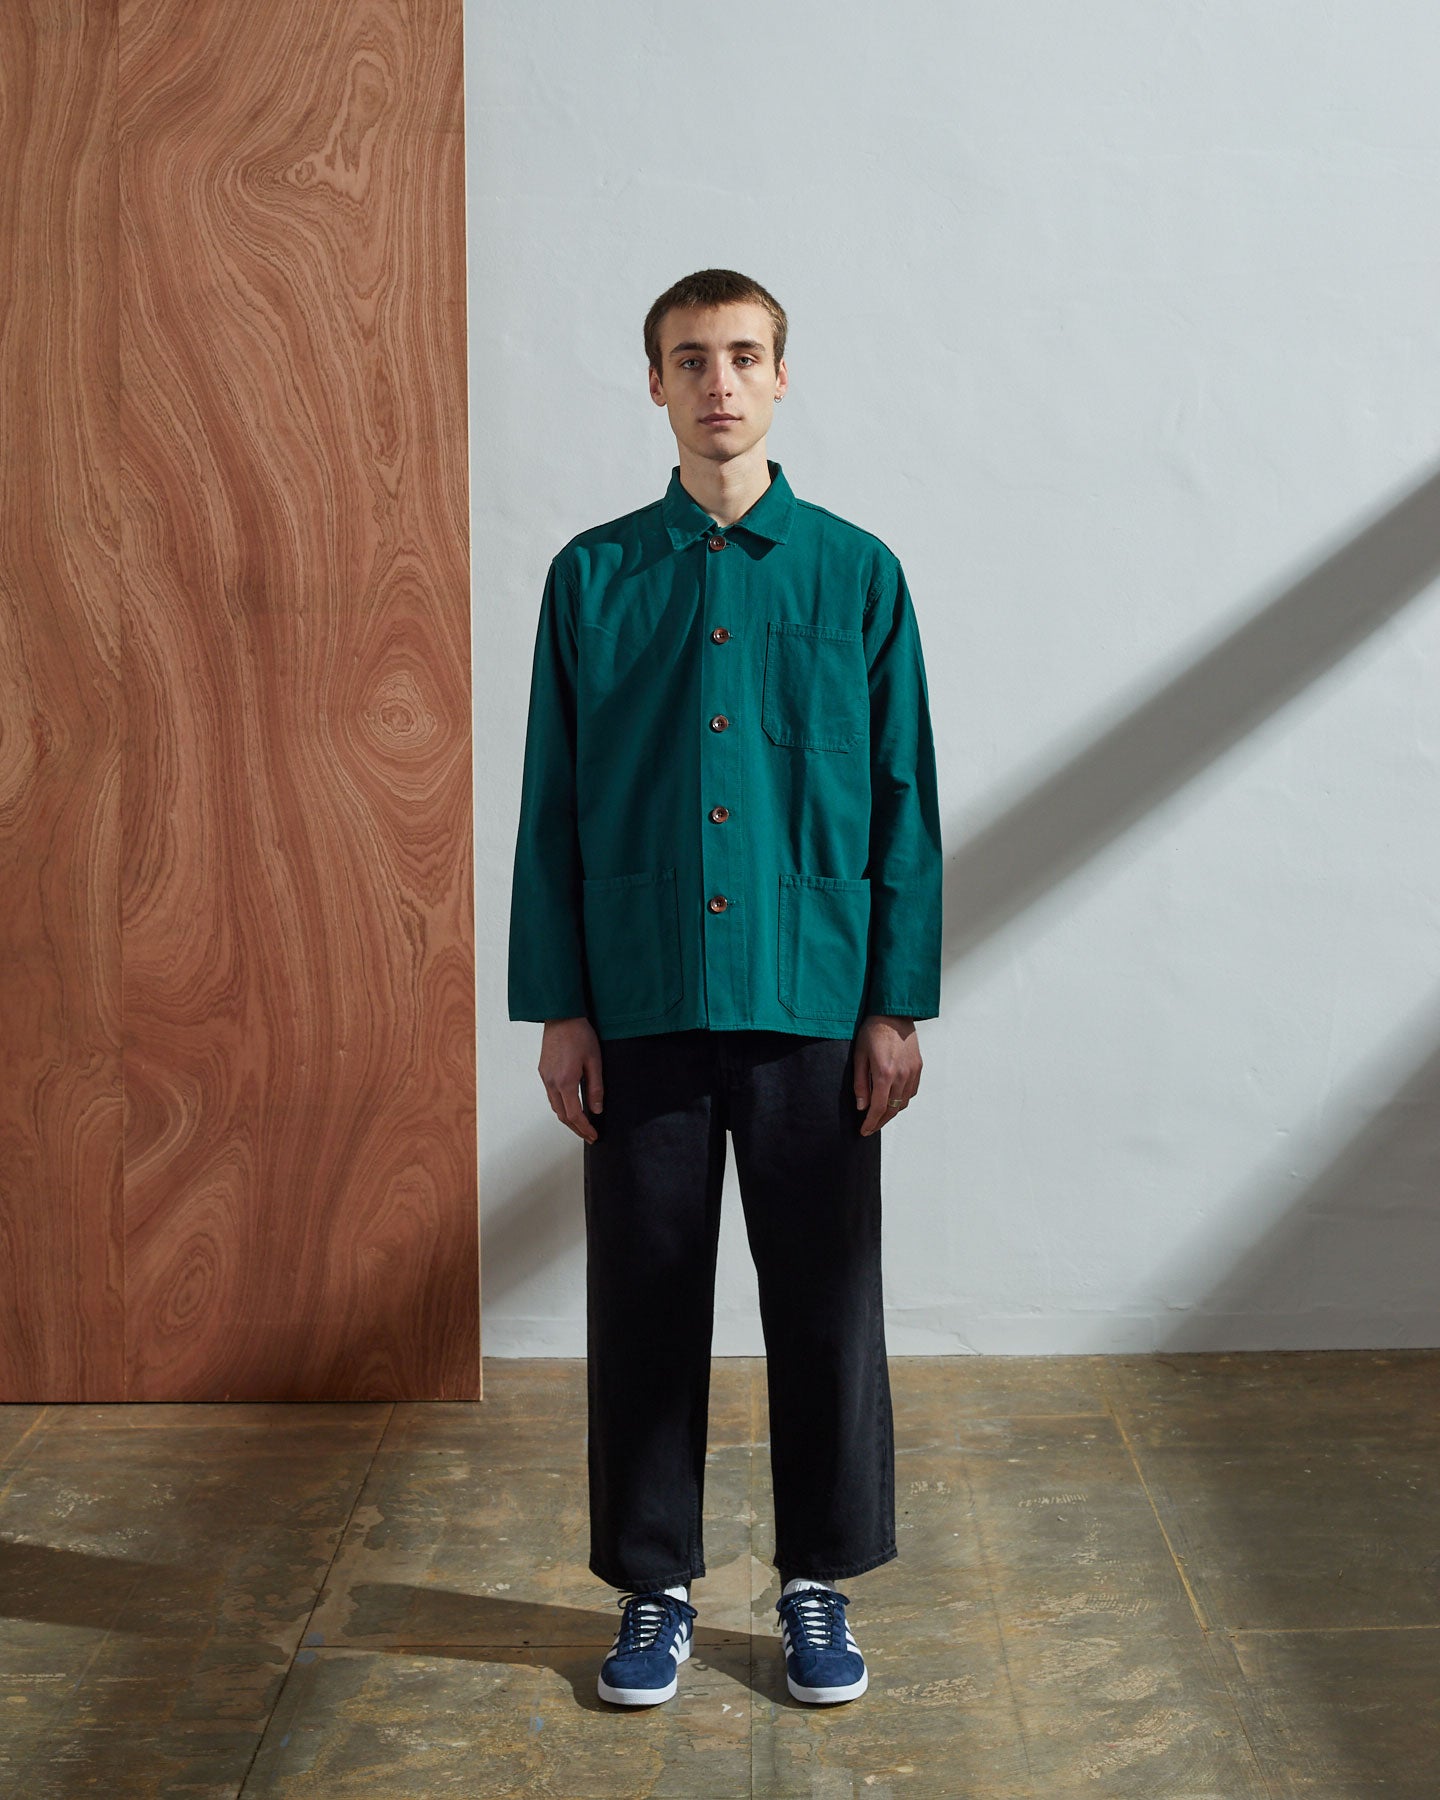 Full-length front view of model wearing #3001, super green organic cotton overshirt paired with dark pants.